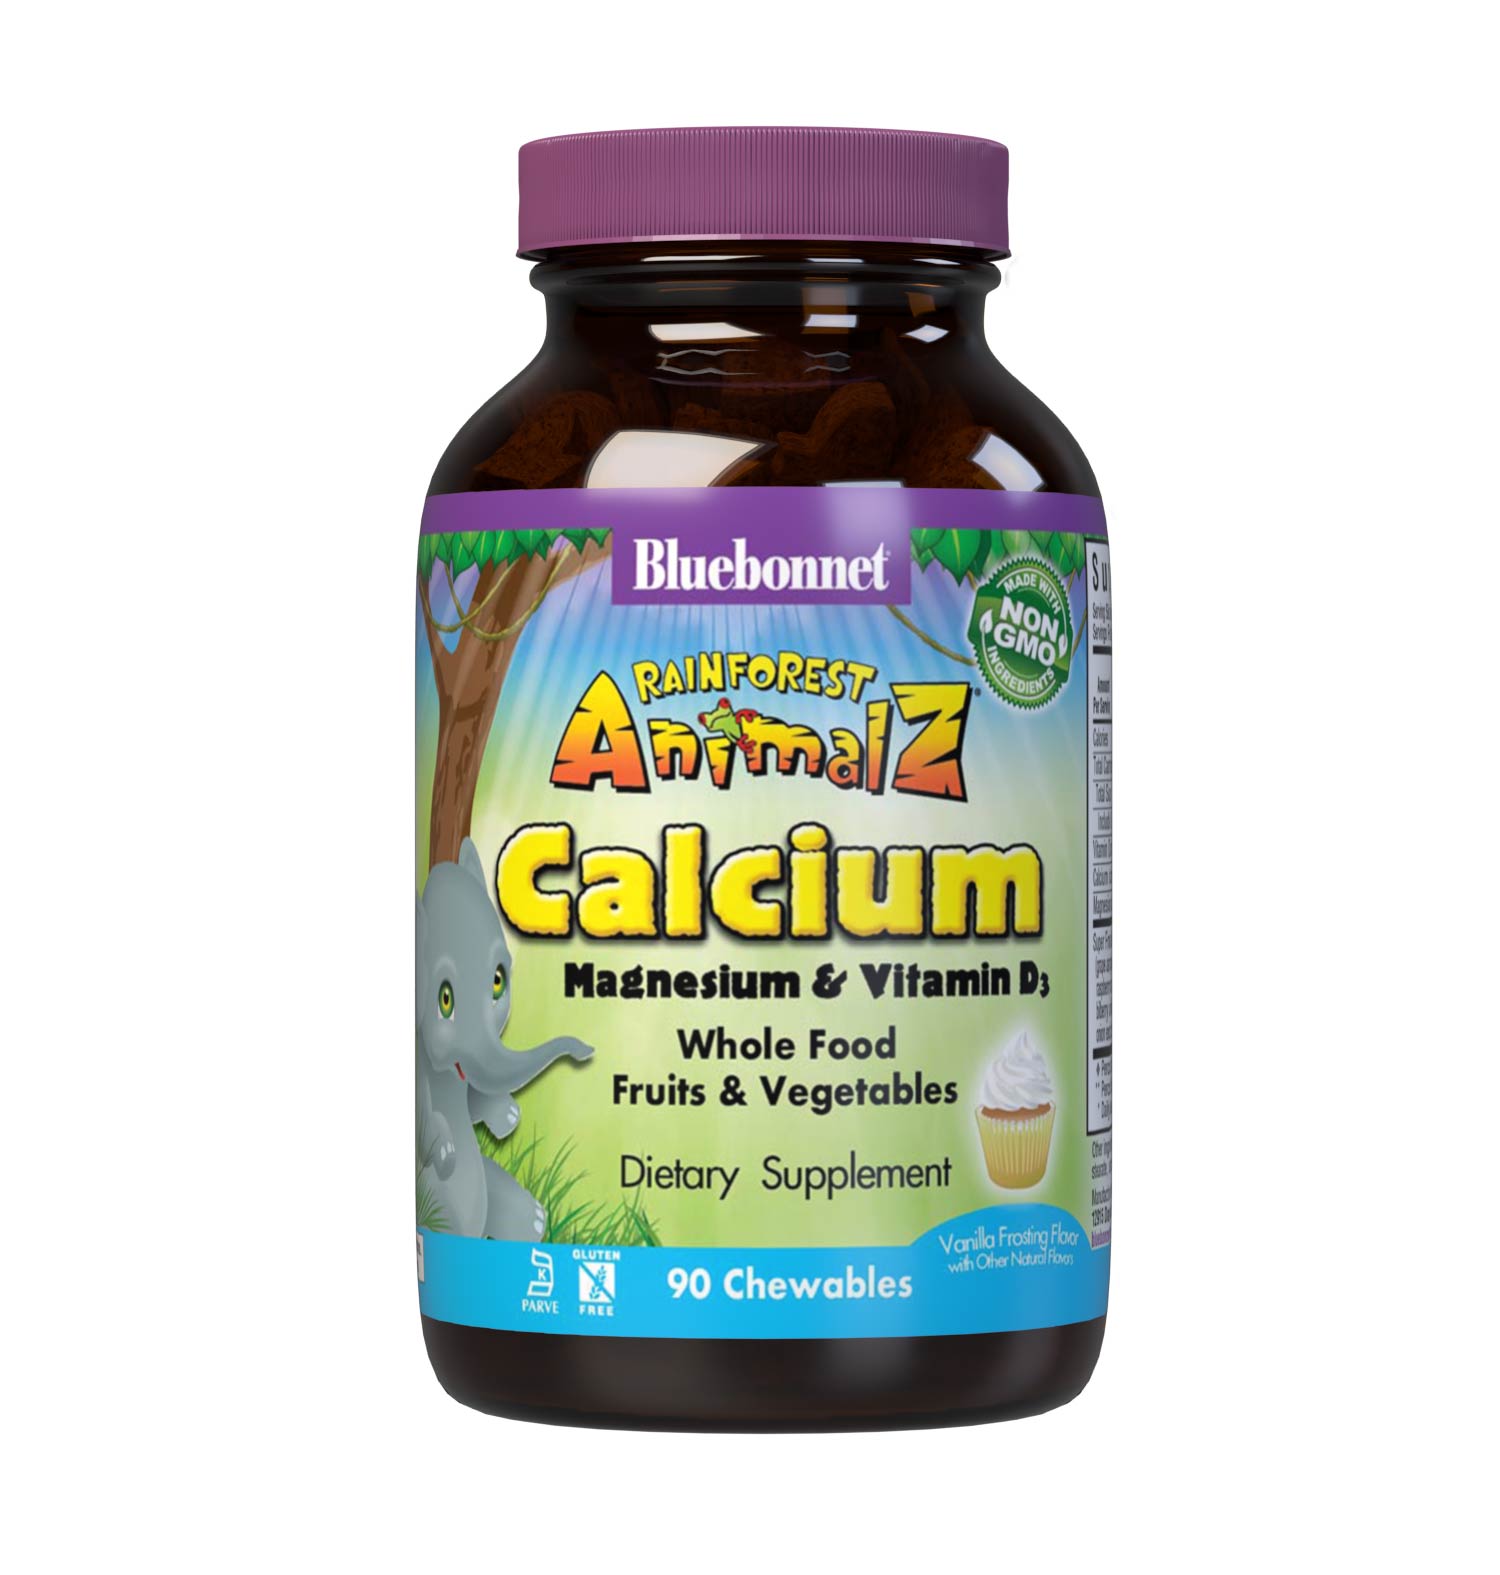 Bluebonnet's Rainforest Animalz Calcium Magnesium & Vitamin D3 90 chewables helps bridge the nutrient gap often found in children's diets with more absorbable forms of calcium, magnesium, as well as vitamin D3 (cholecalciferol) to help support strong bones and healthy teeth in a base of super fruits and vegetables. All this in just two yummy animal-shaped chewables per serving. #size_90 count